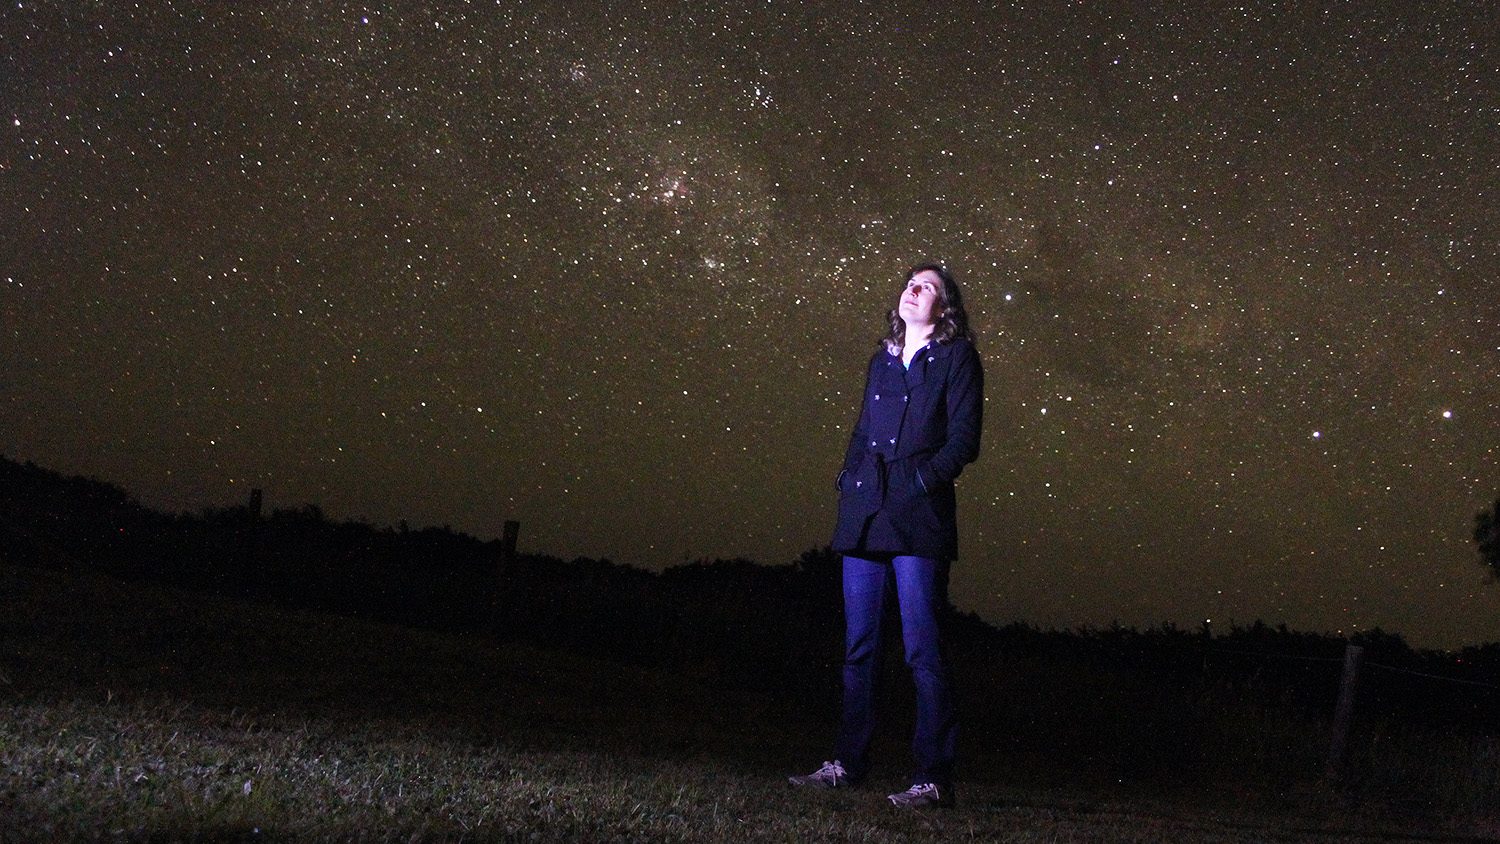 Astrophysicist Katie Mack stares up at a starry night sky